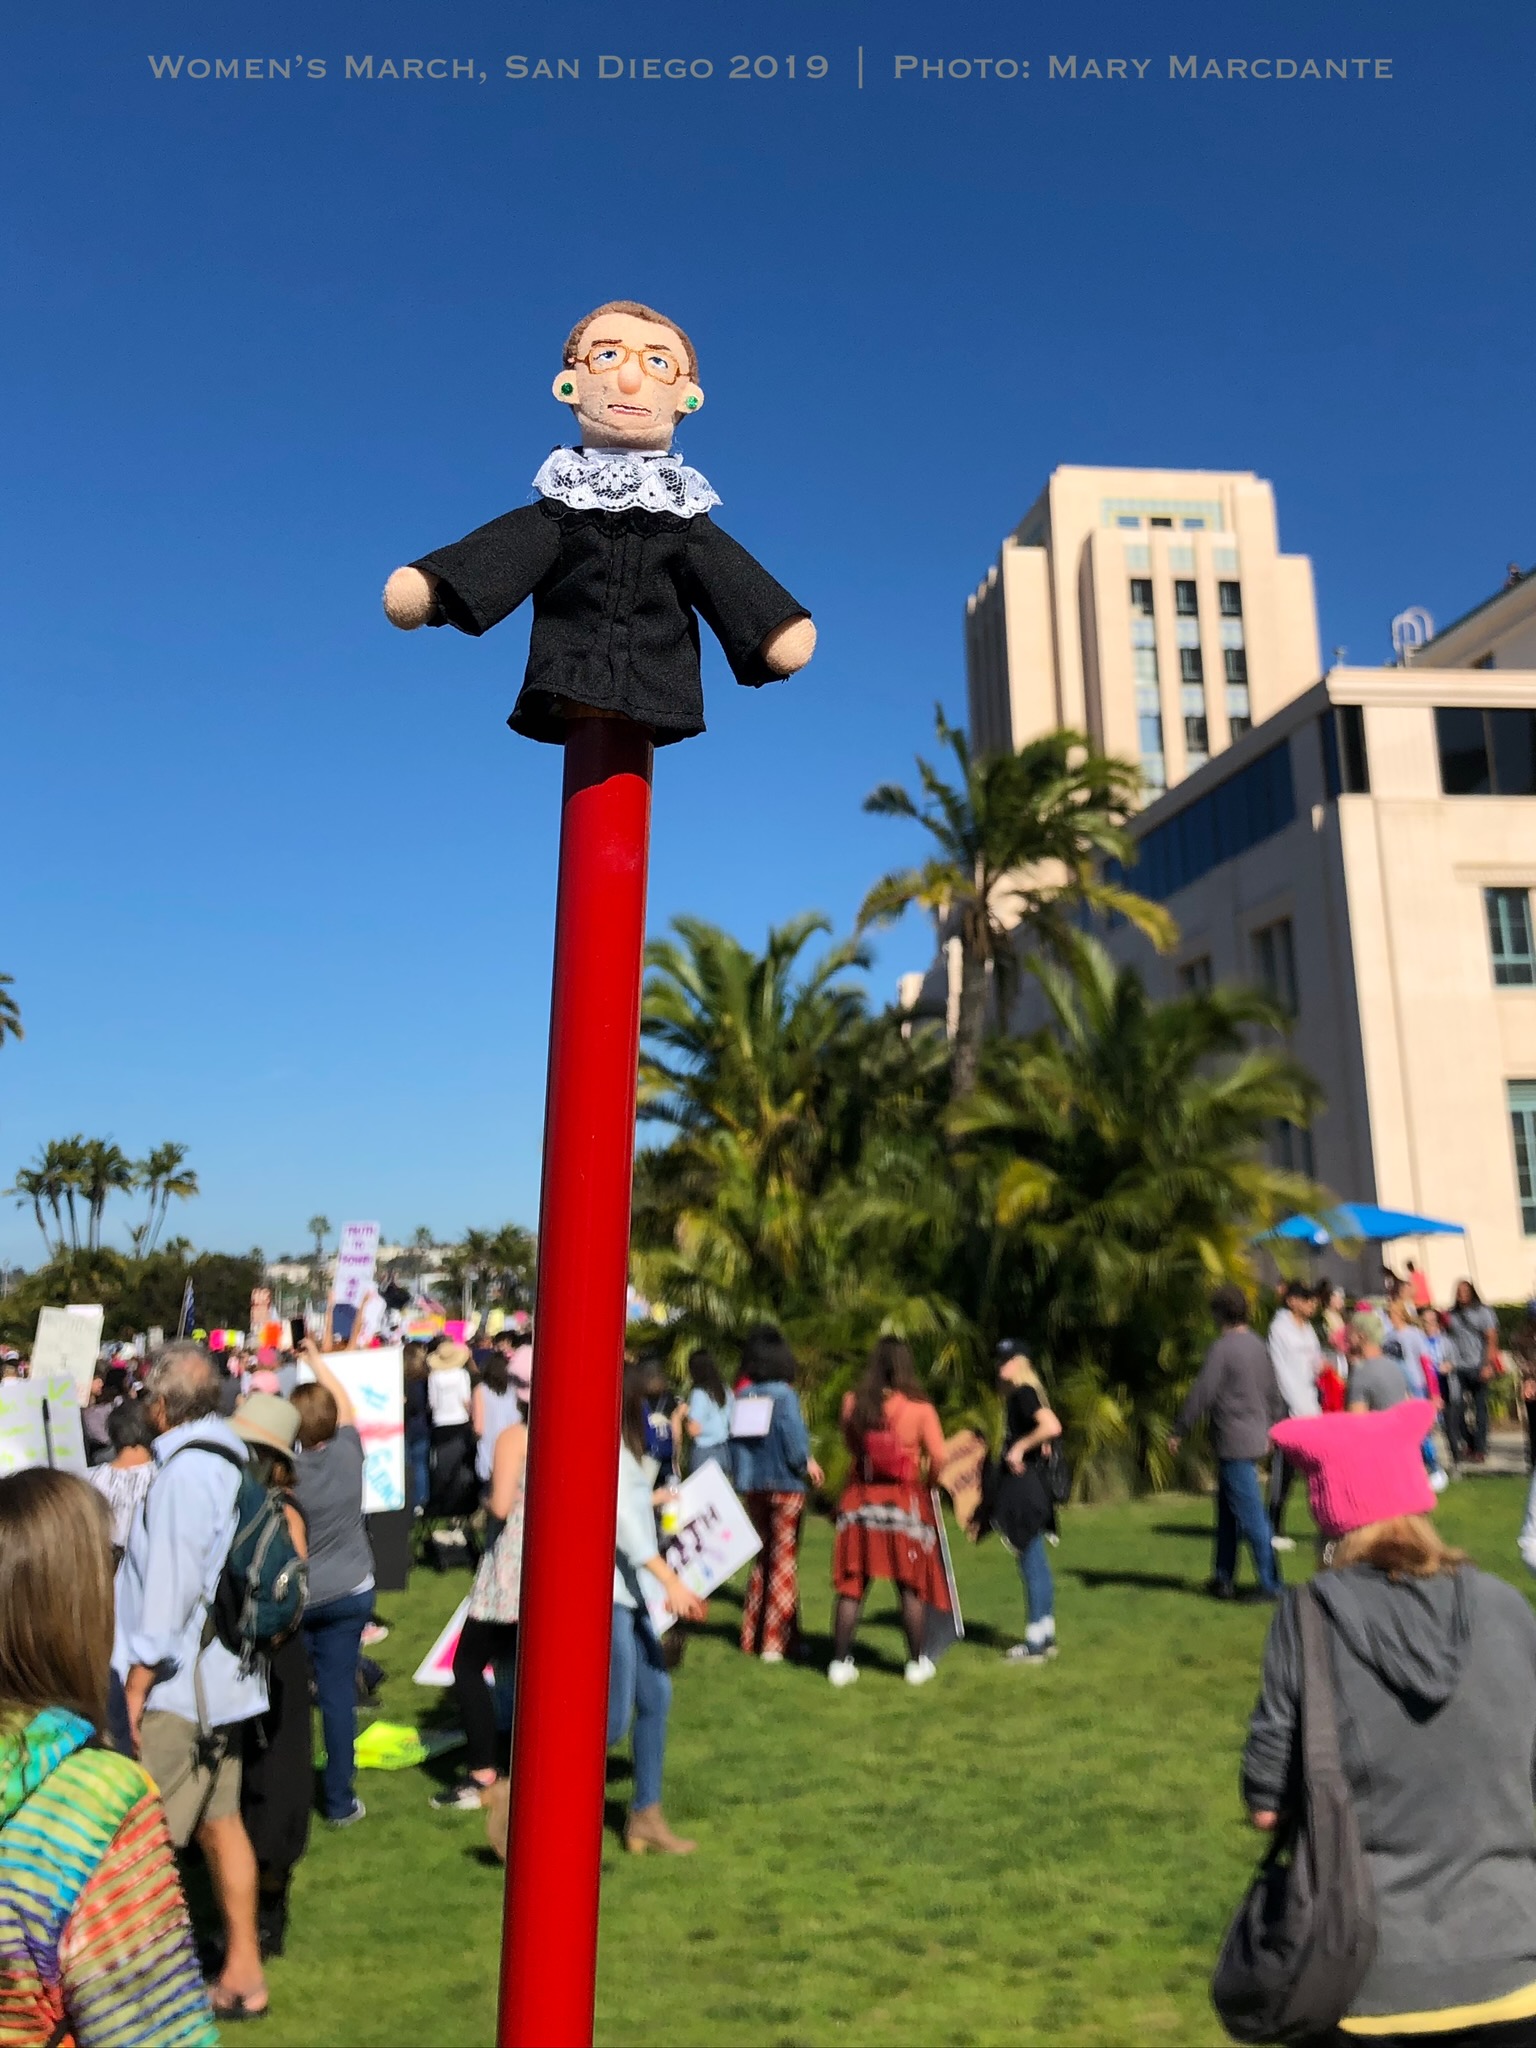 Ruth Bader Ginsberg doll at San Diego Administration Building Women's March, 2019